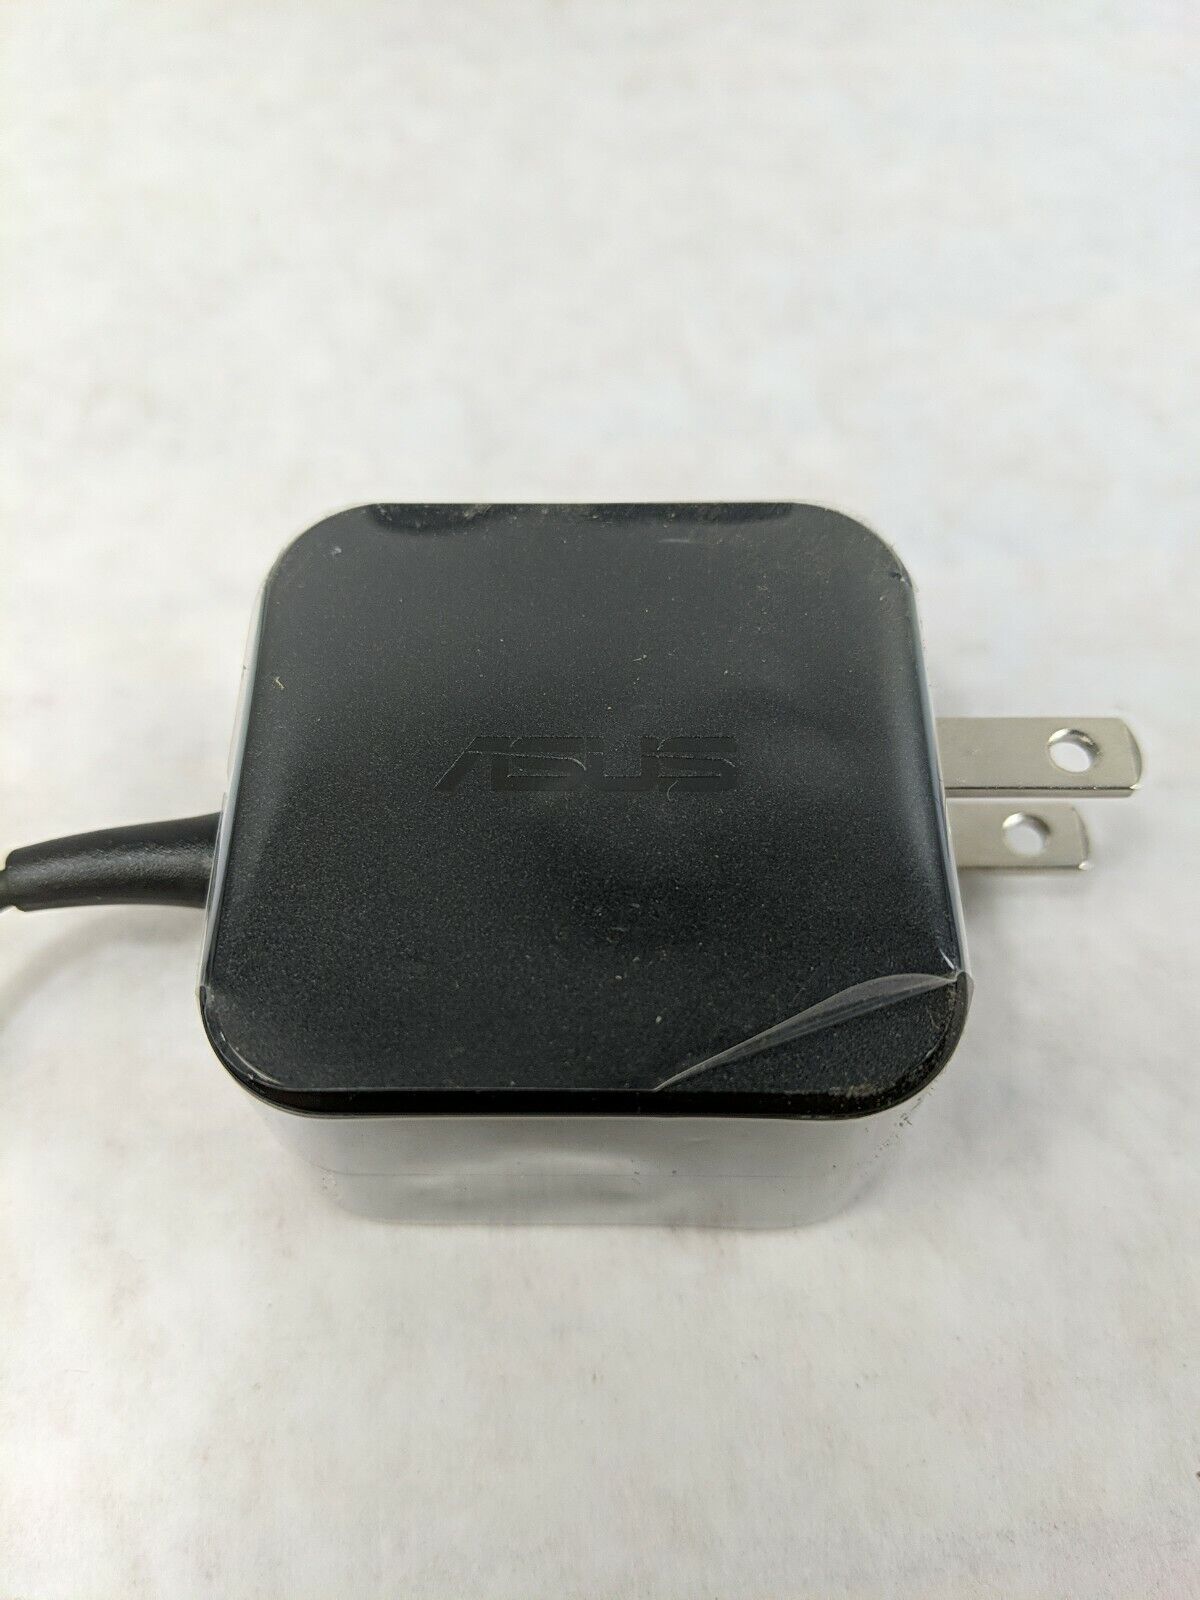 Asus N24W-01 Adapter / Charger 24W For C201PA C100P C100PA